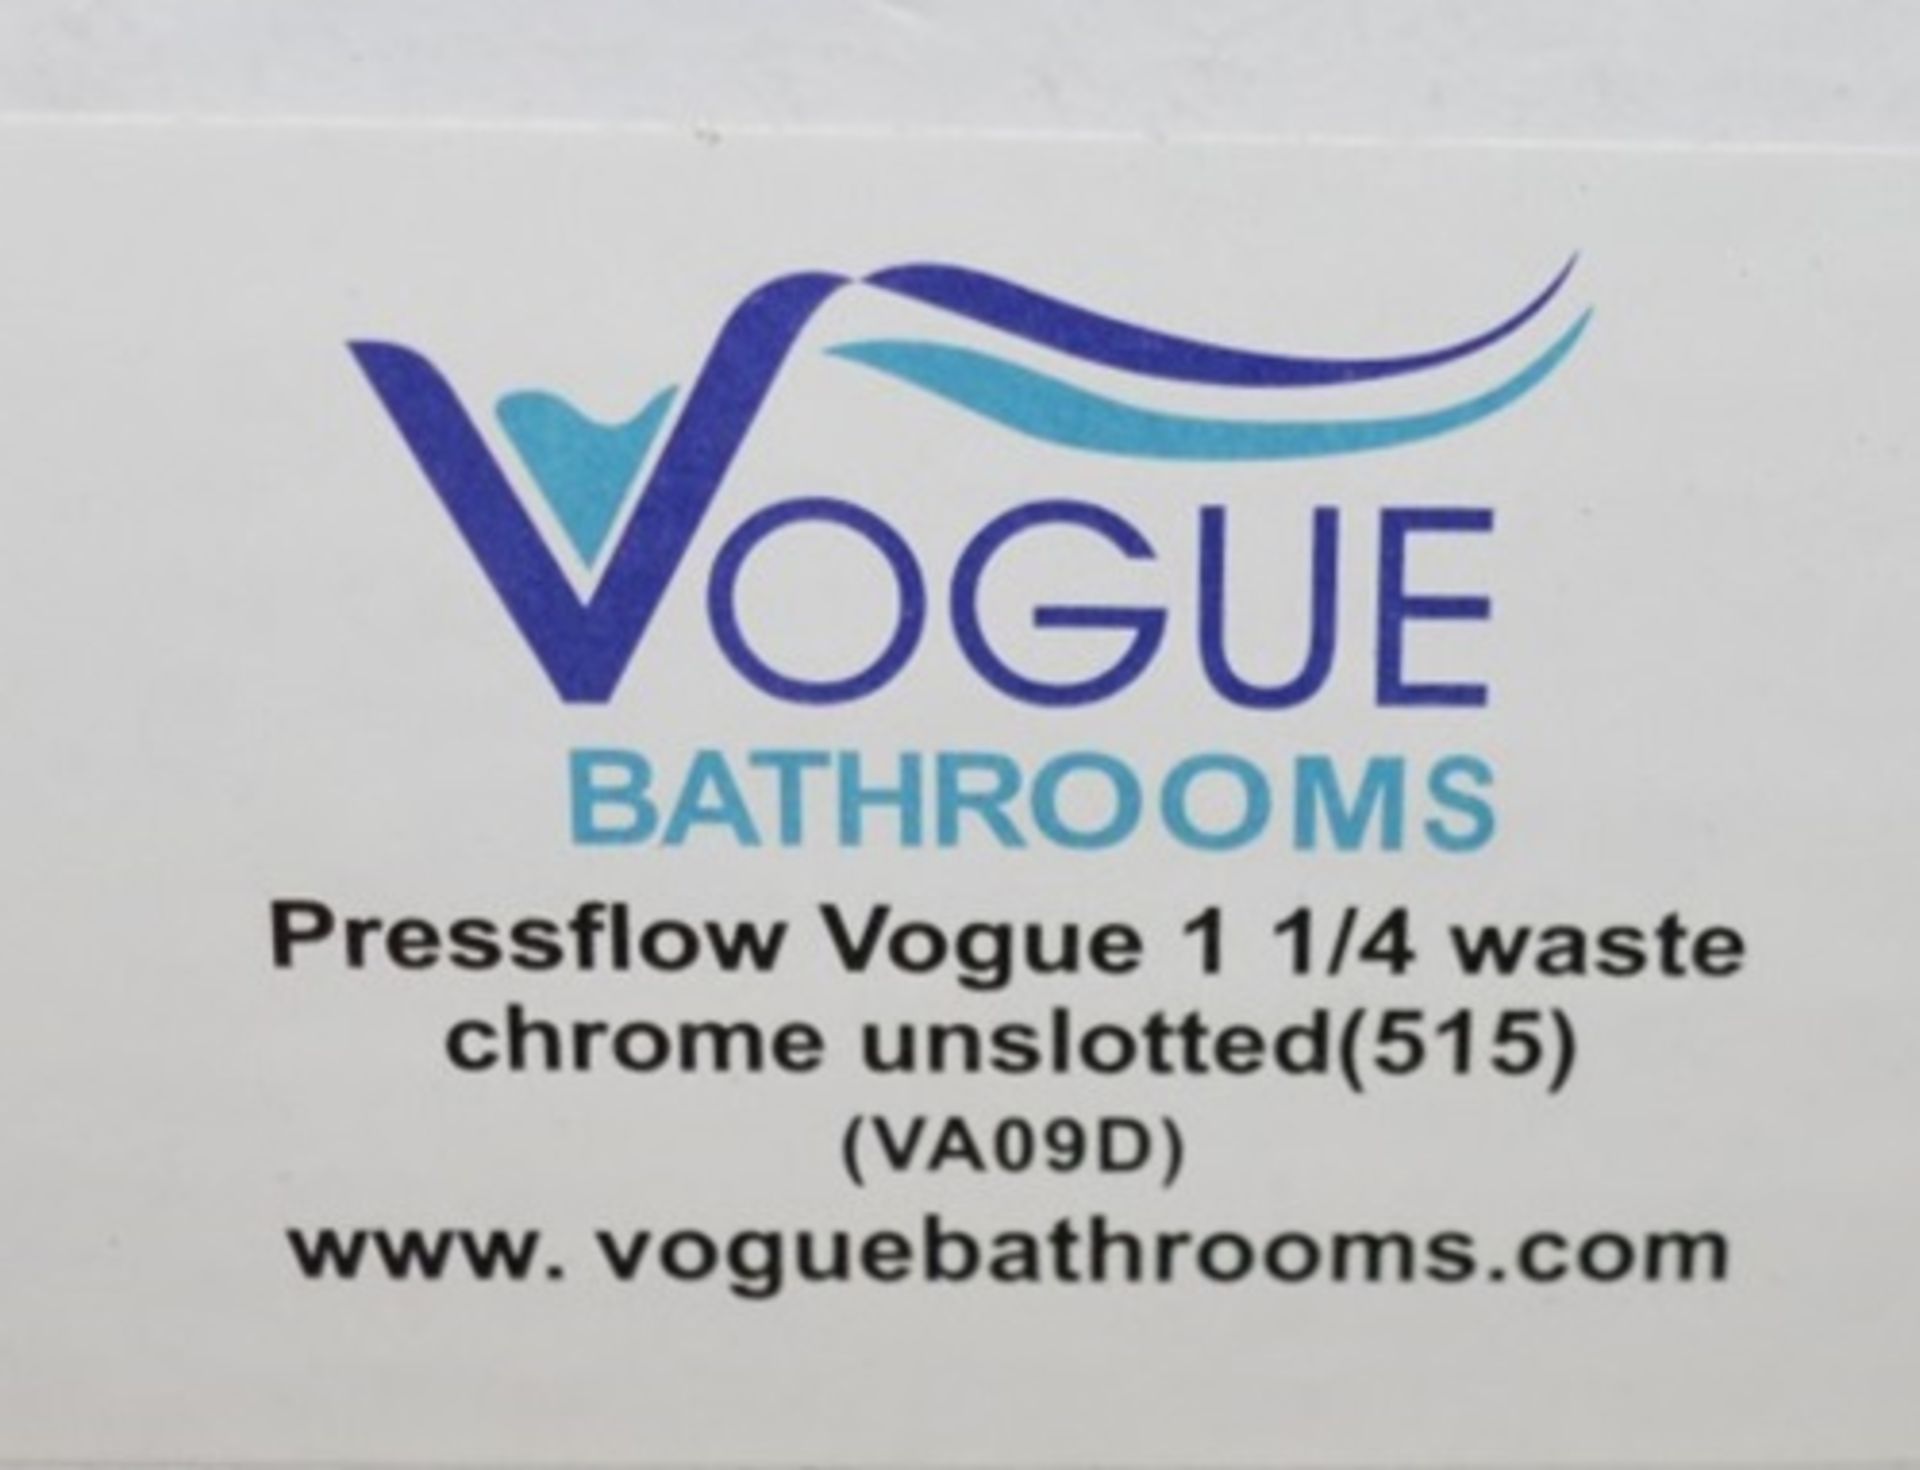 35 x Vogue Bathrooms Pressflow 1 1/4 Unslotted Waste Chrome Waste Fittings - VA09D - Brand New Stock - Image 2 of 5